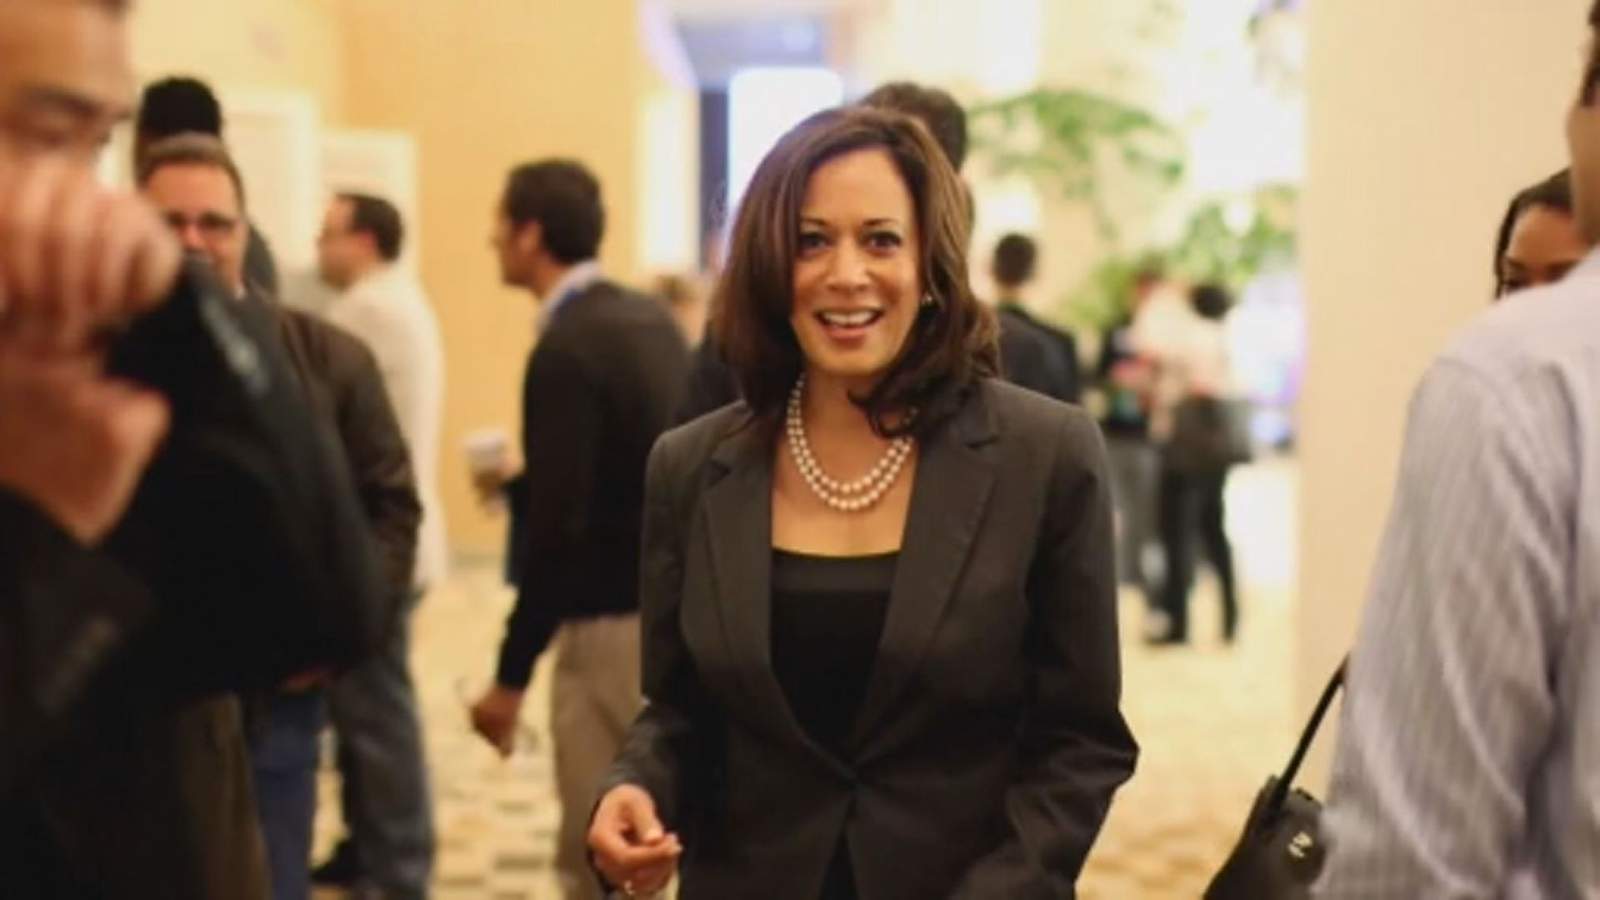 Vice President-elect Kamala Harris seen as inspiration to women, other groups